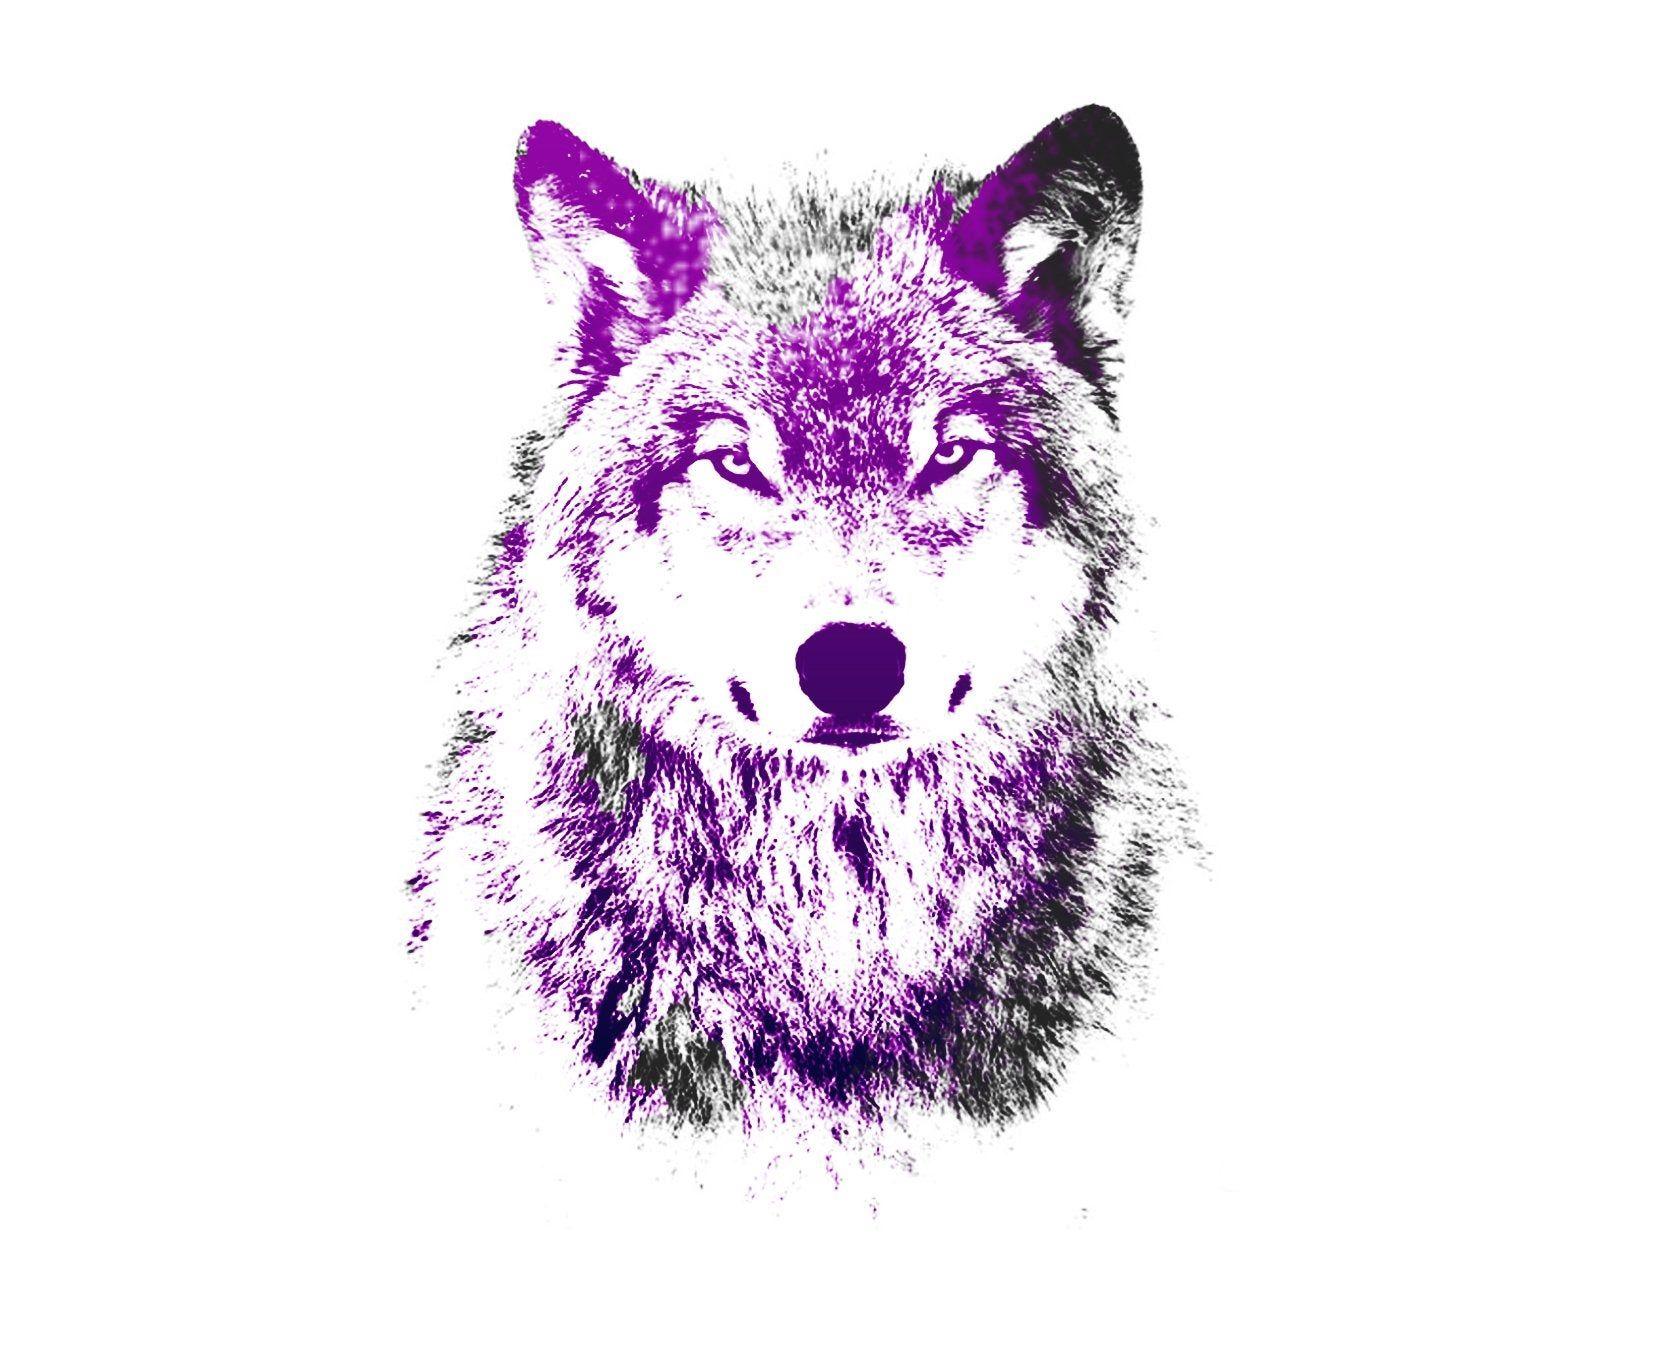 Purple Wolf Wallpapers Top Free Purple Wolf Backgrounds Wallpaperaccess